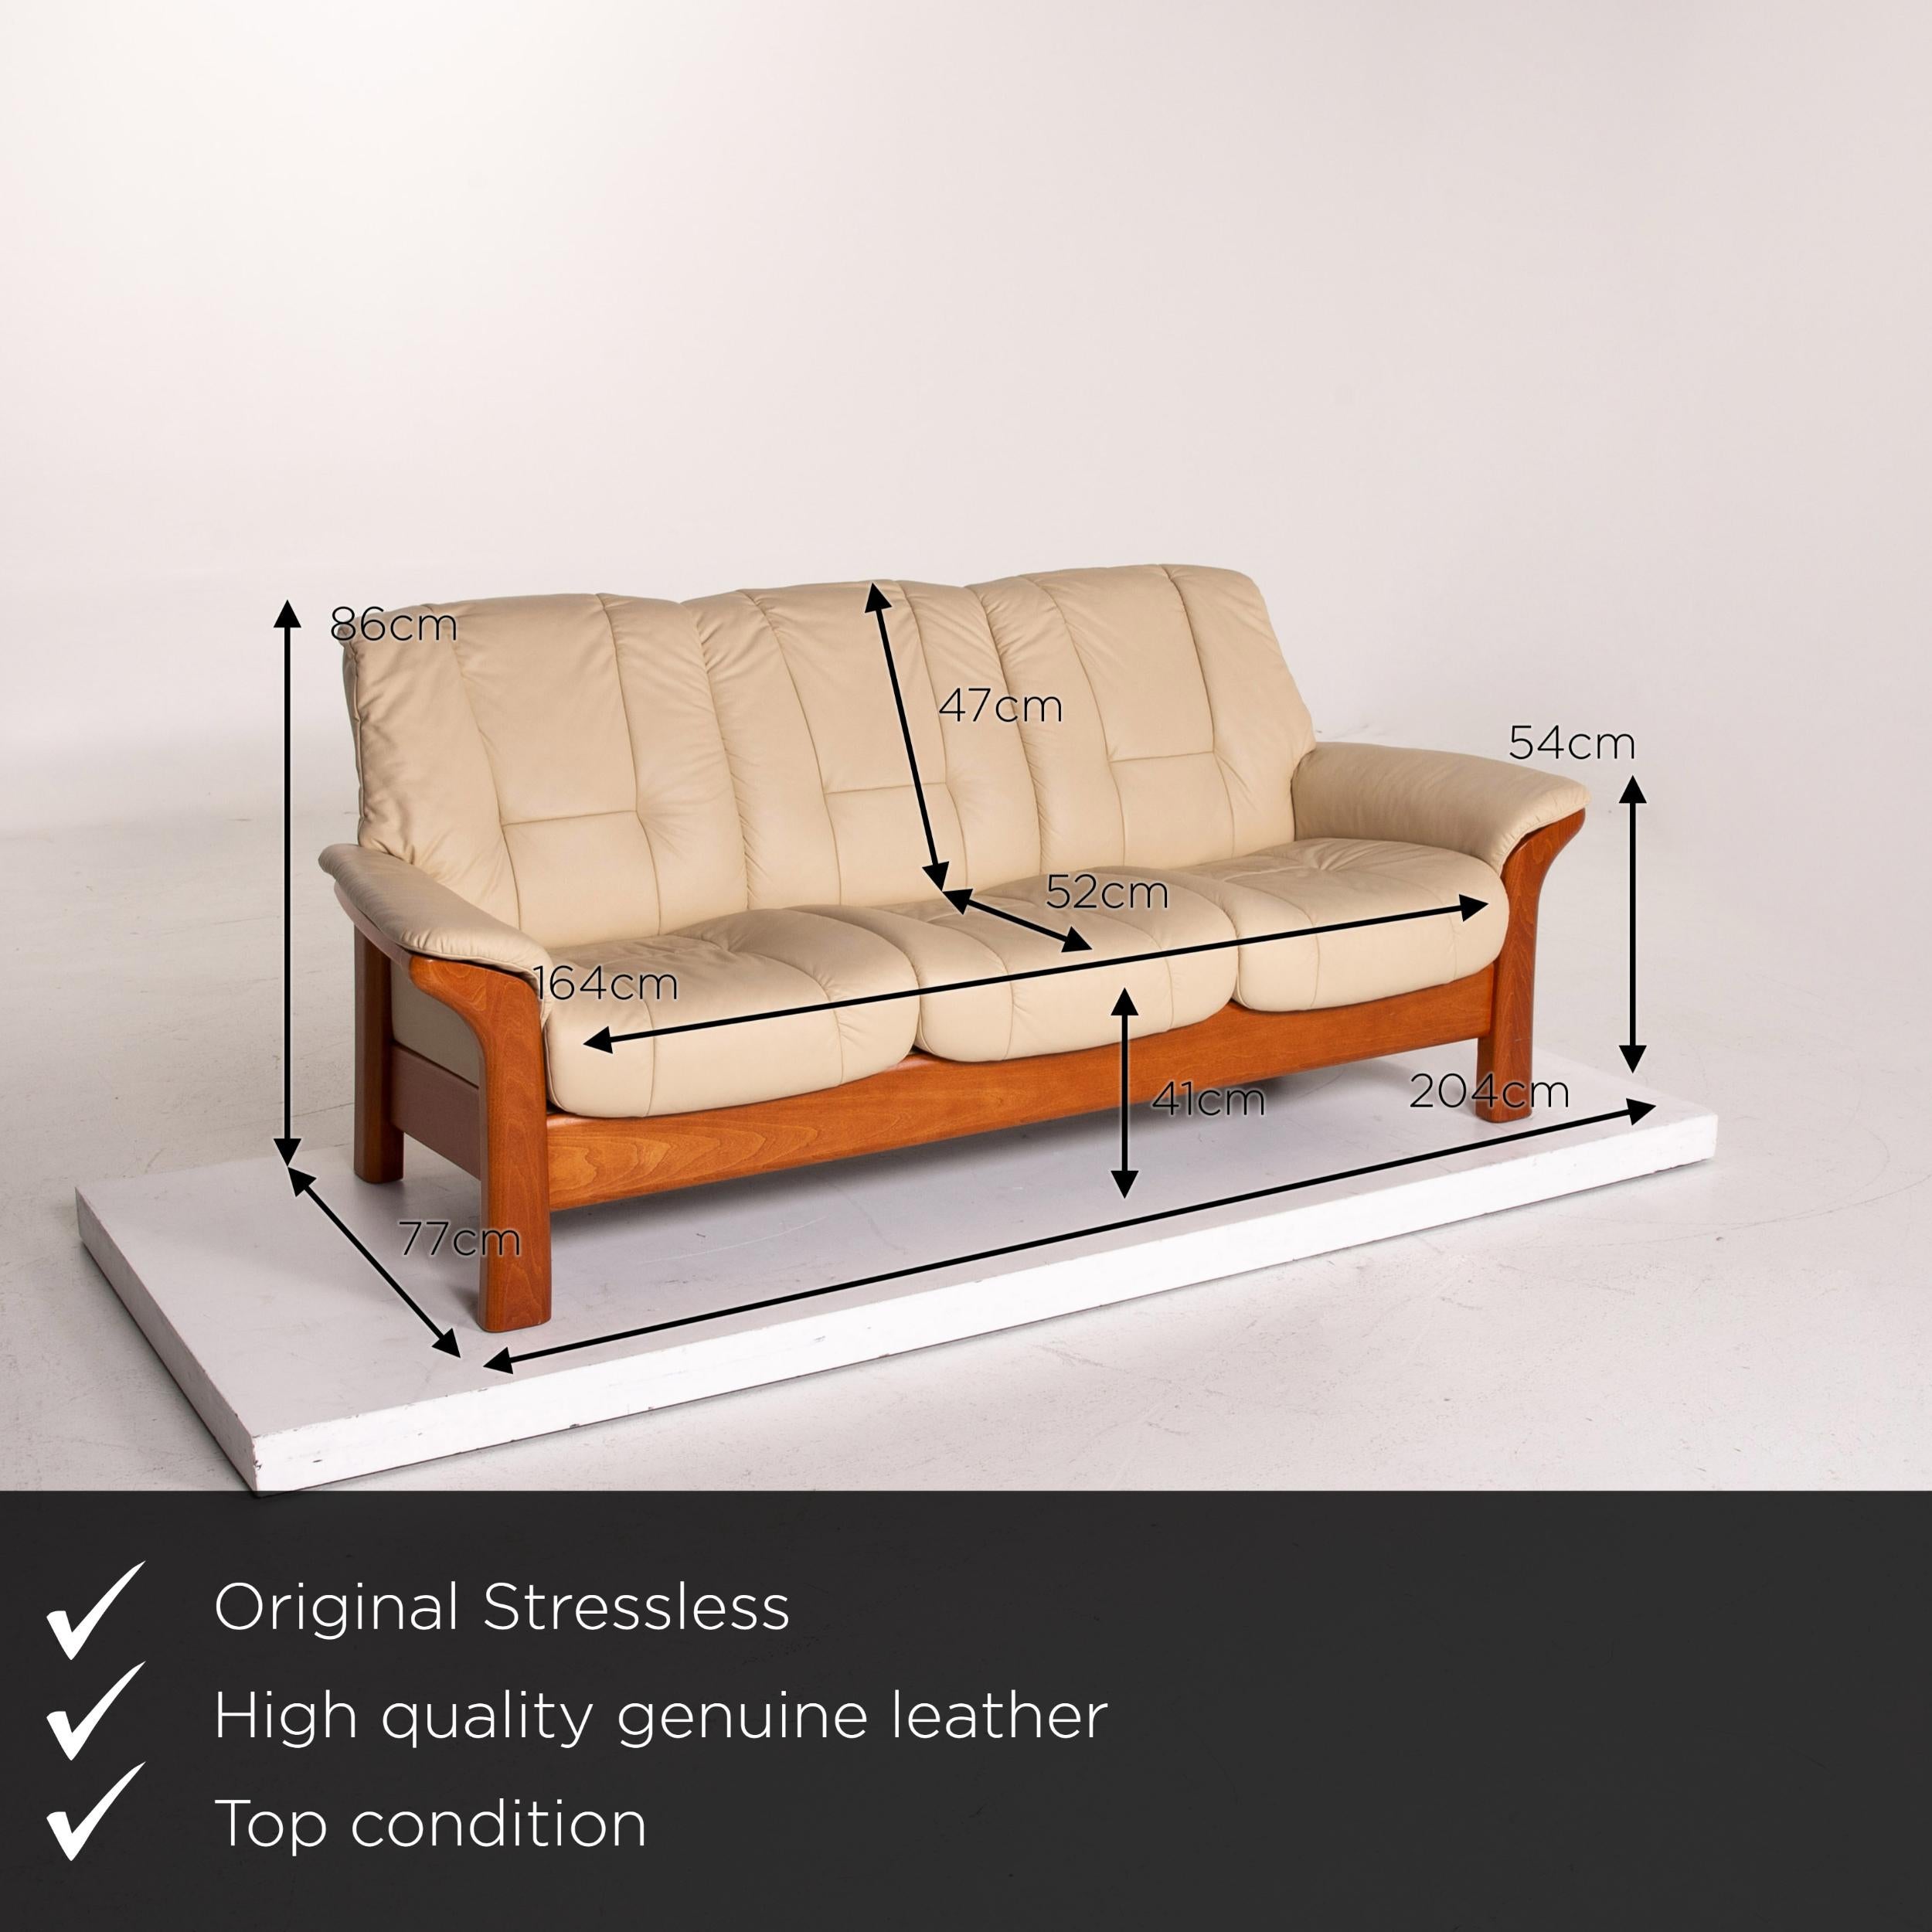 We present to you a Stressless Buckingham leather sofa cream three-seat feature couch.
 

 Product measurements in centimeters:
 

Depth 77
Width 204
Height 86
Seat height 41
Rest height 54
Seat depth 52
Seat width 164
Back height